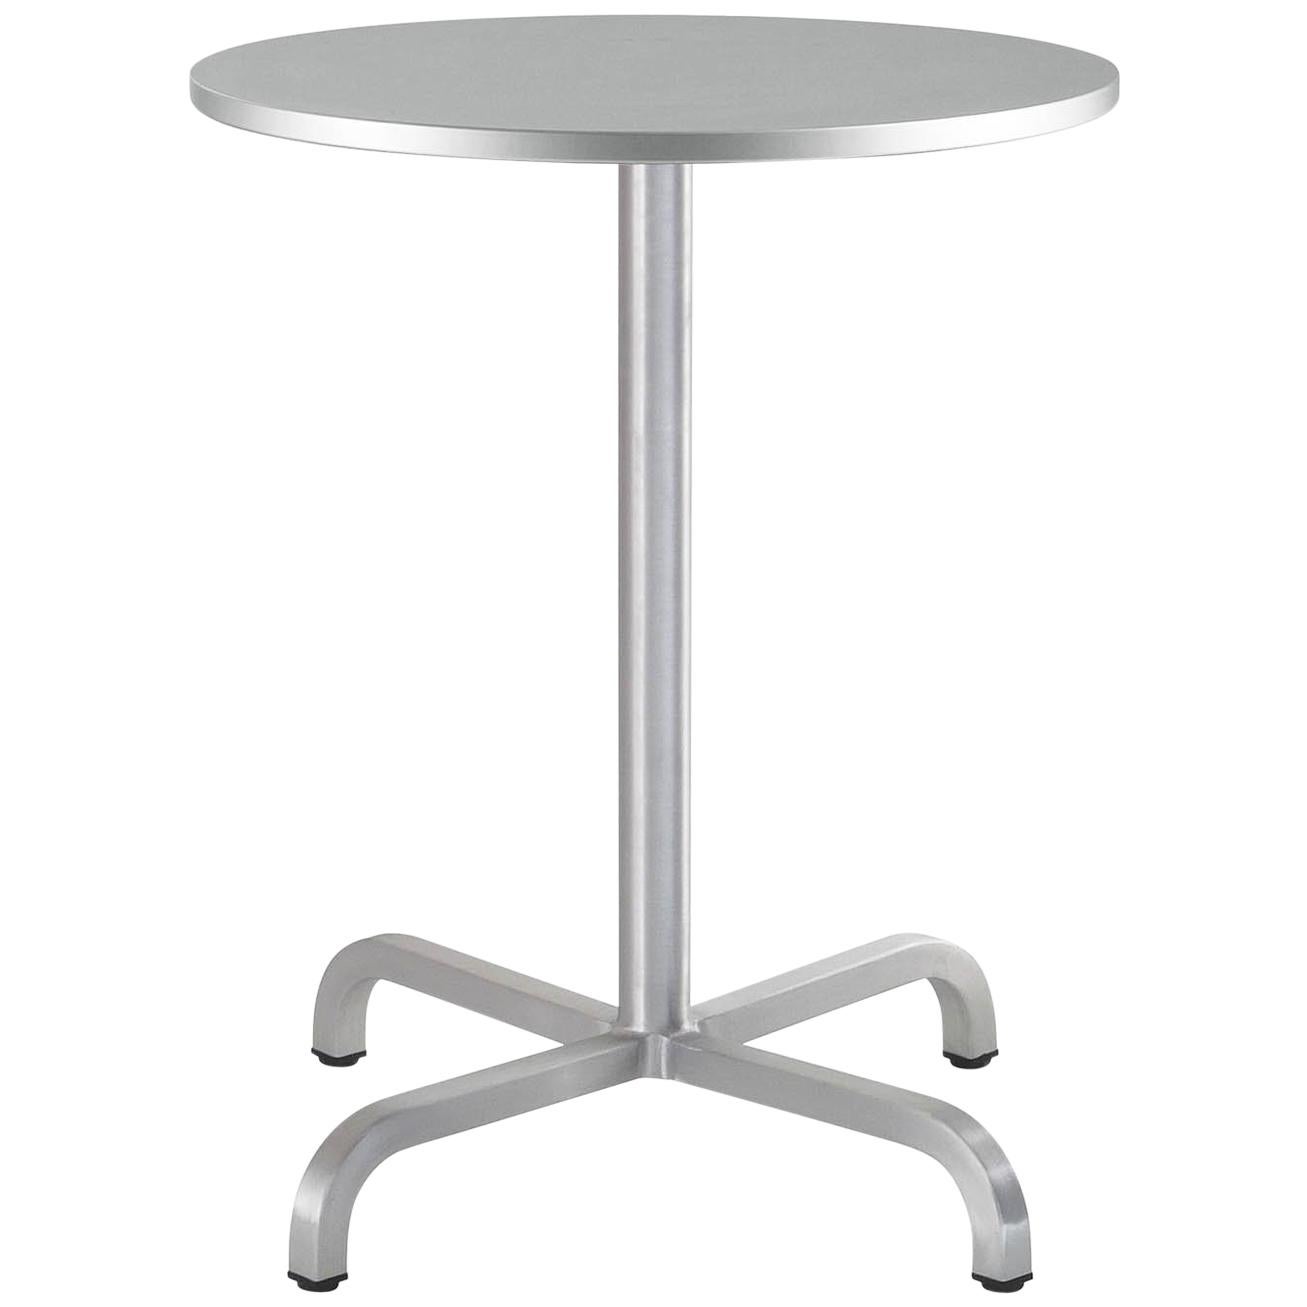 Emeco 20-06 Small Round Café Table with Gray Laminate Top by Norman Foster For Sale